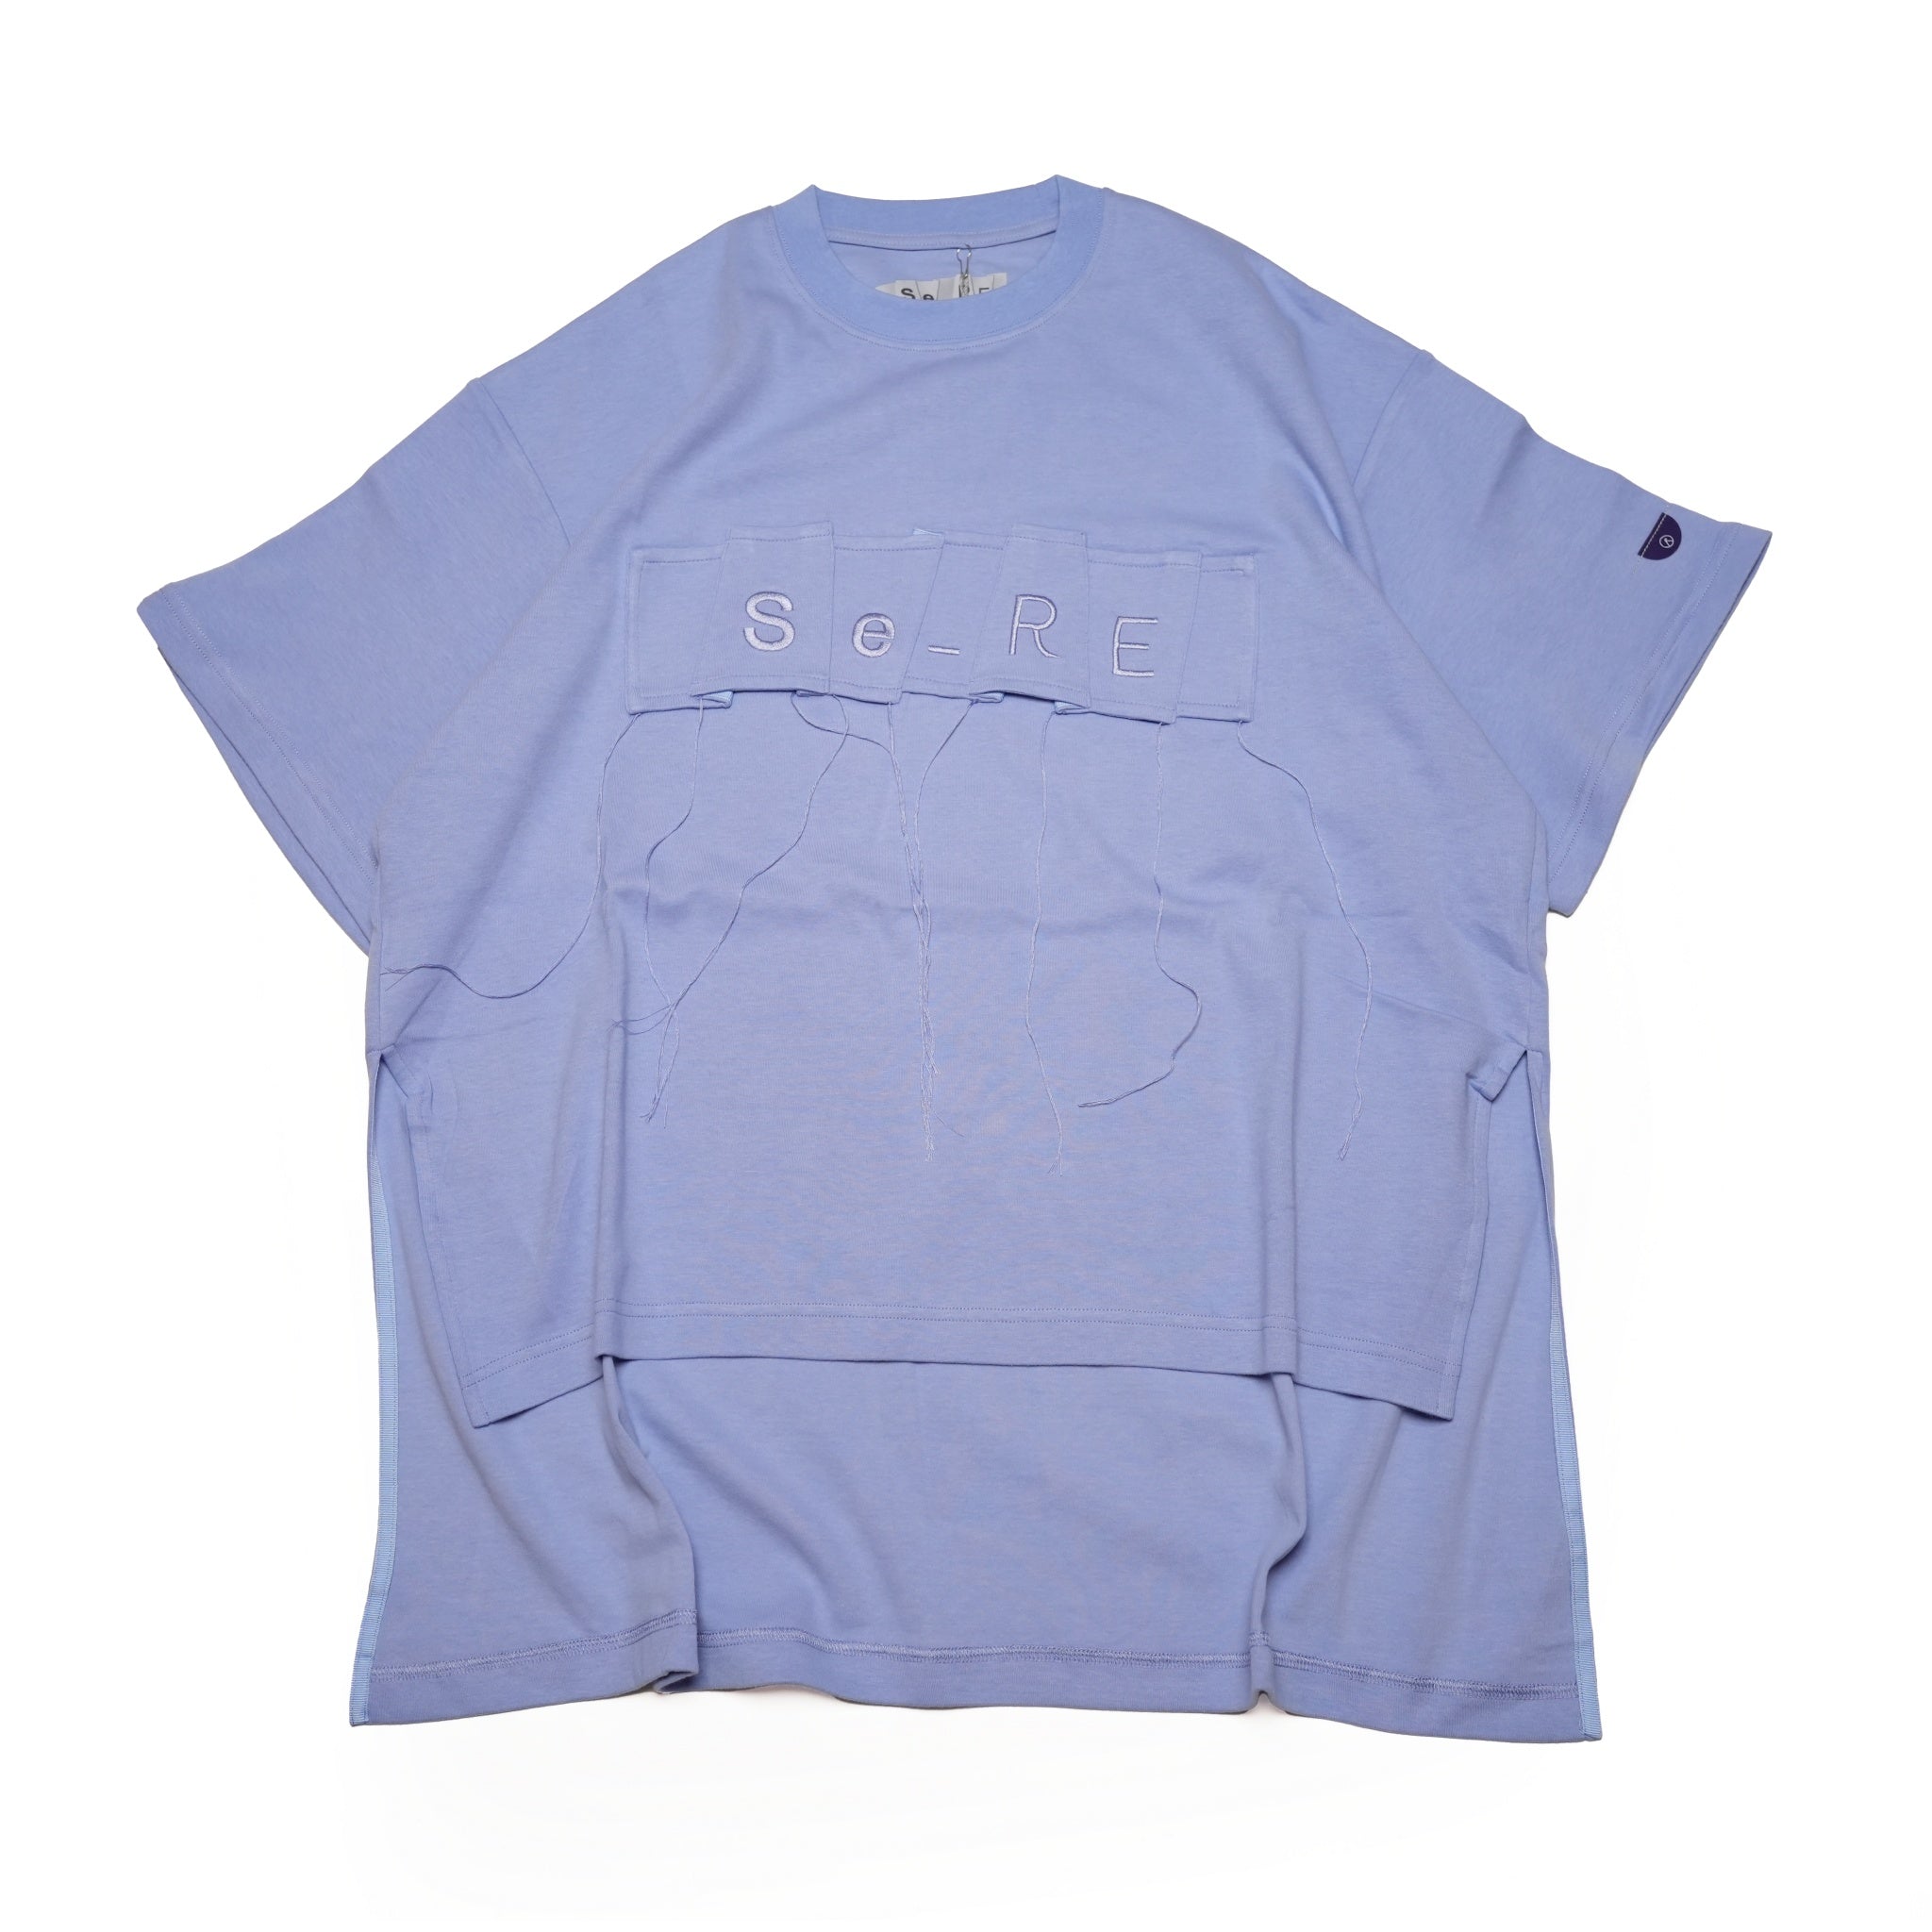 No:SNS24-RE-T02 | Name:SeRE：FYI tee -Blue 【SEIVSON_セイブソン】